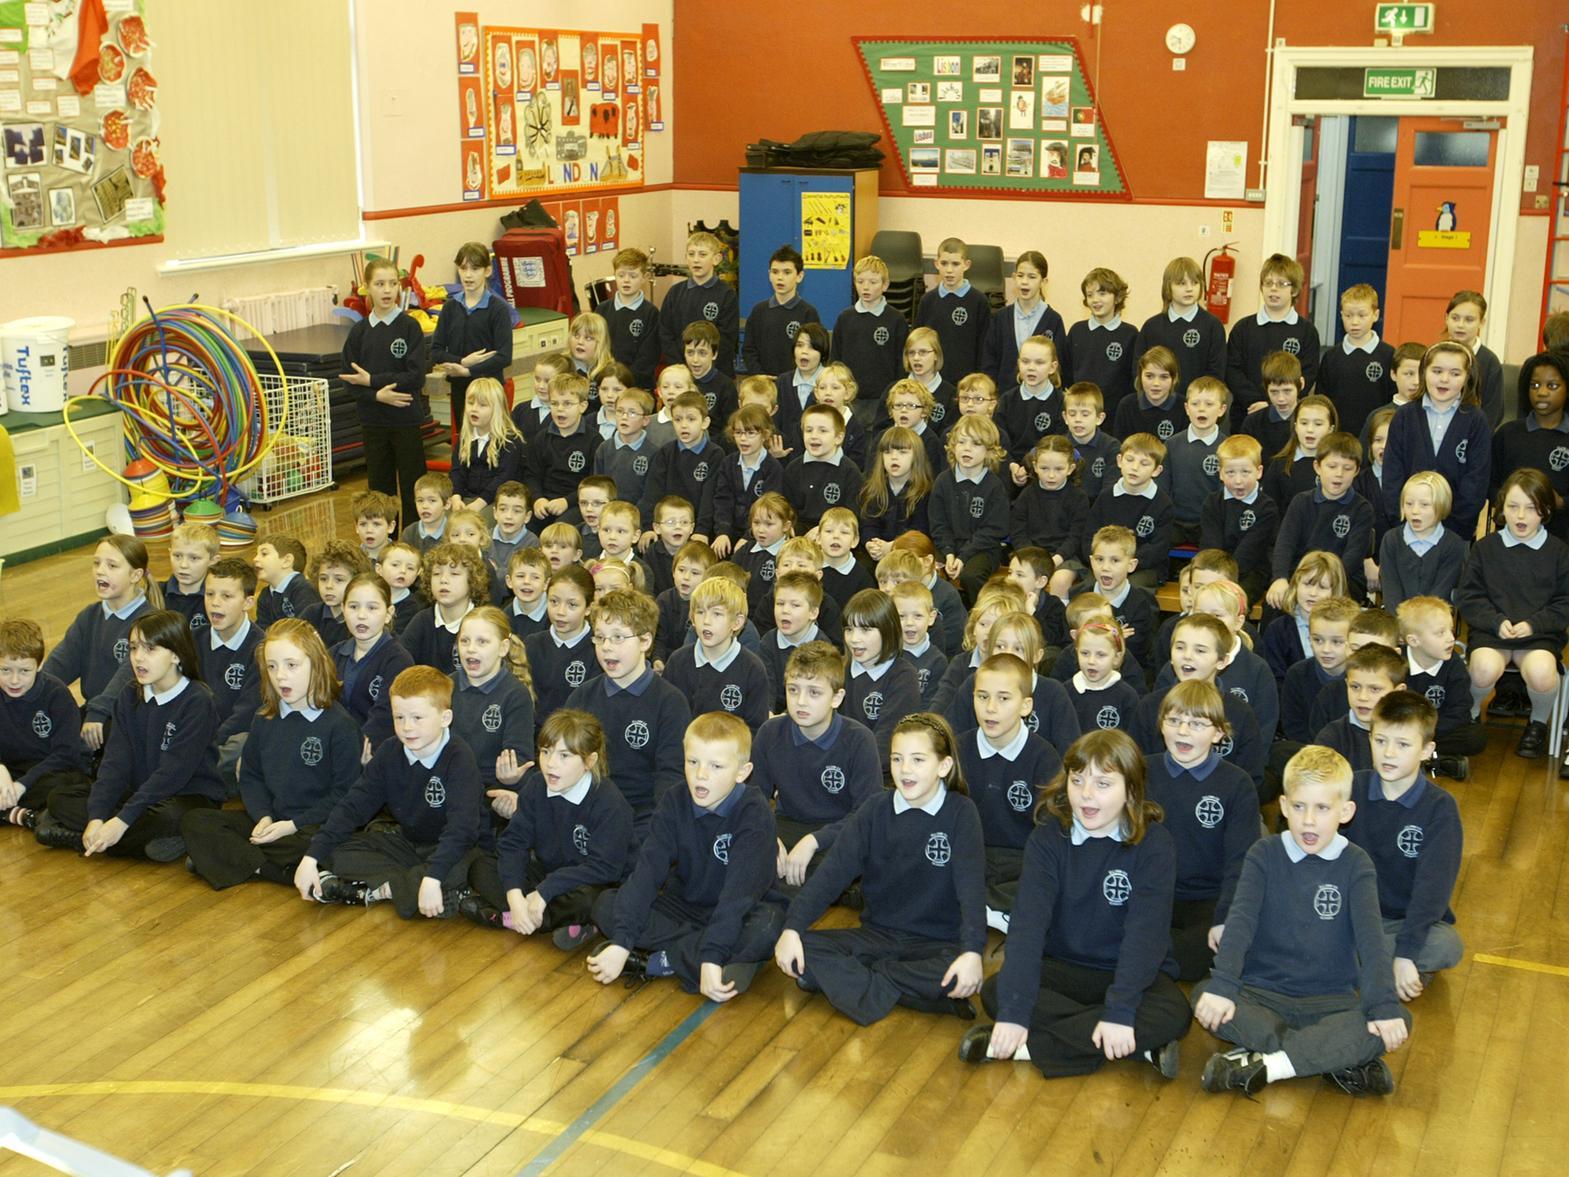 This picture from 2008 shows students from Elland C of E School taking part in a Song for Christmas competition.